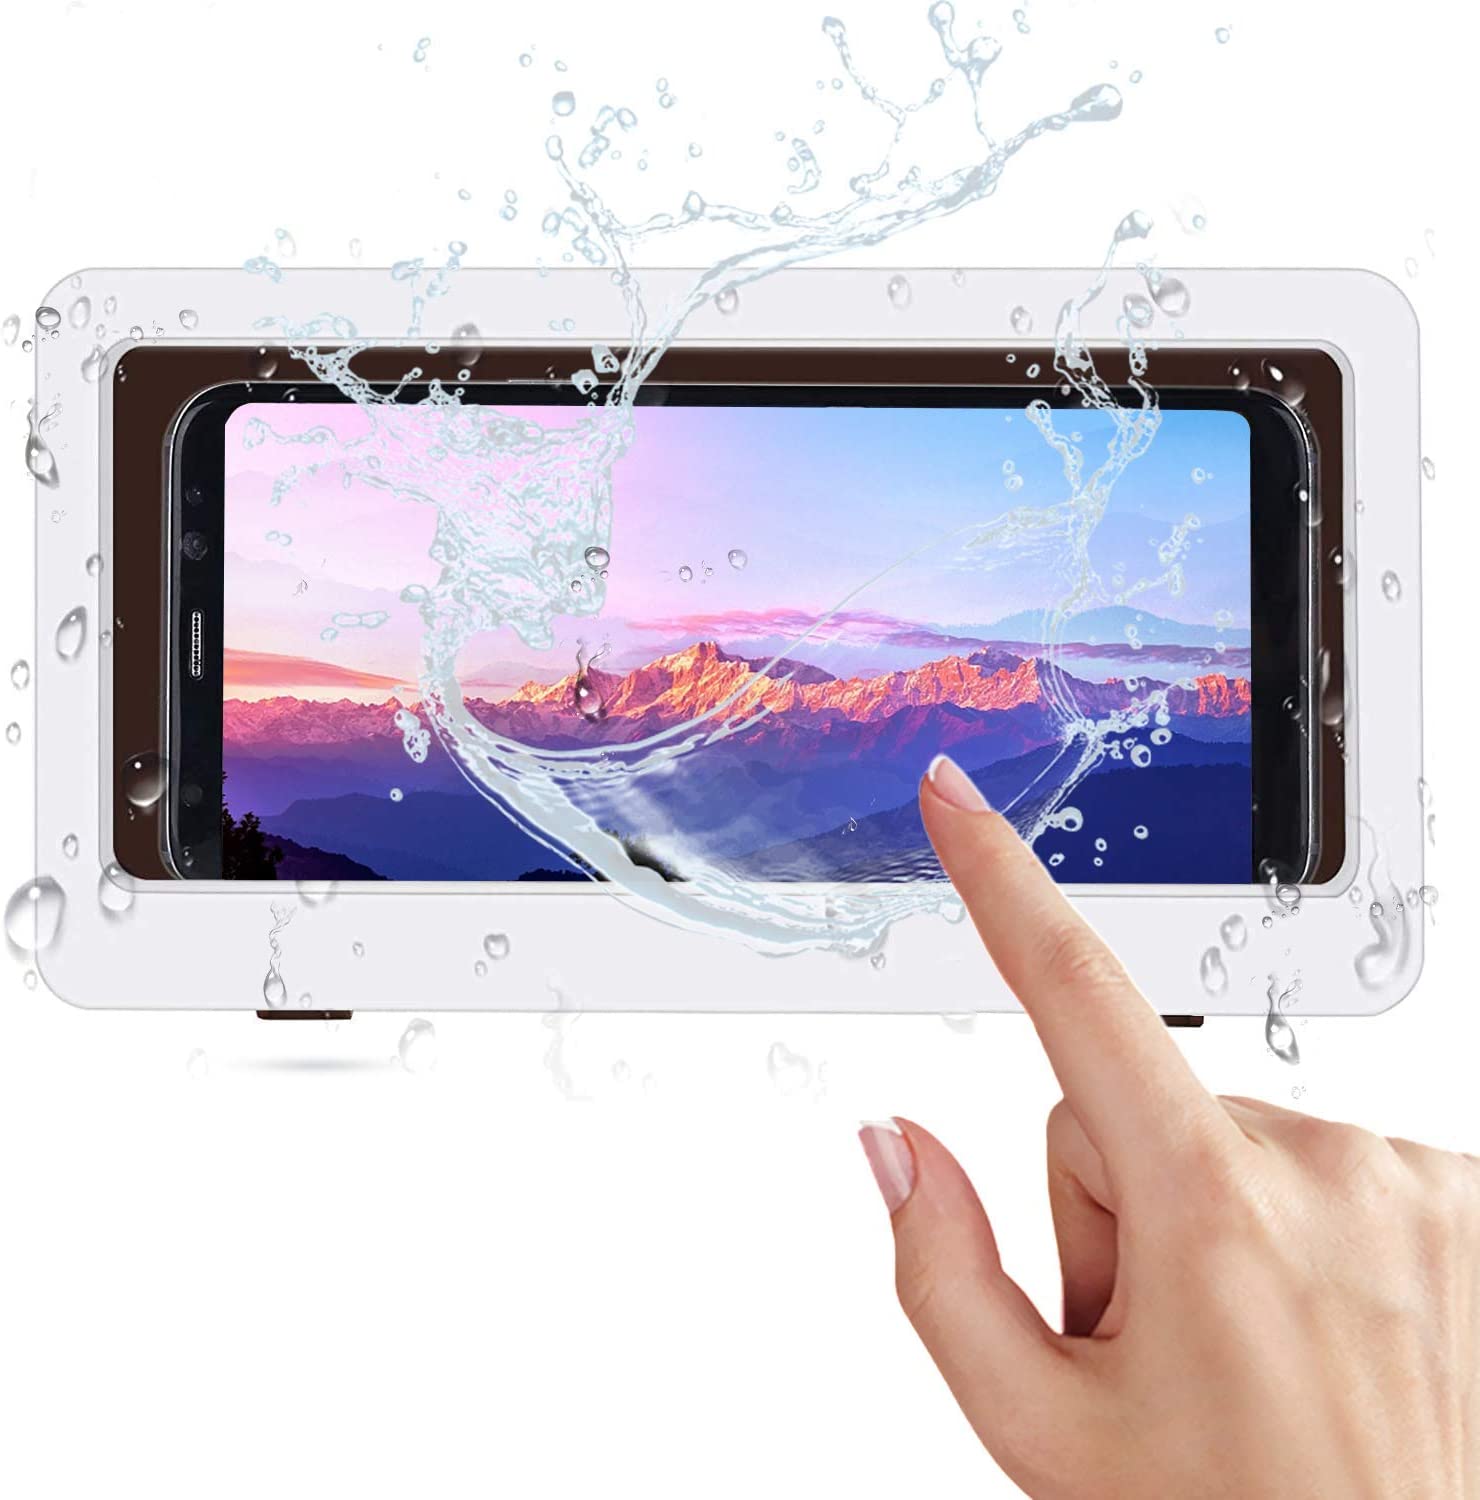 Shower Phone Case - Wall Wall Pocket - Bathroom Touch Screen Waterproof Cell Phone Holder Box Touch Screen Cell Phone Wall Pocket - Cell Phone Case for Cell Phones Under 6.8 Inch - image 1 of 3